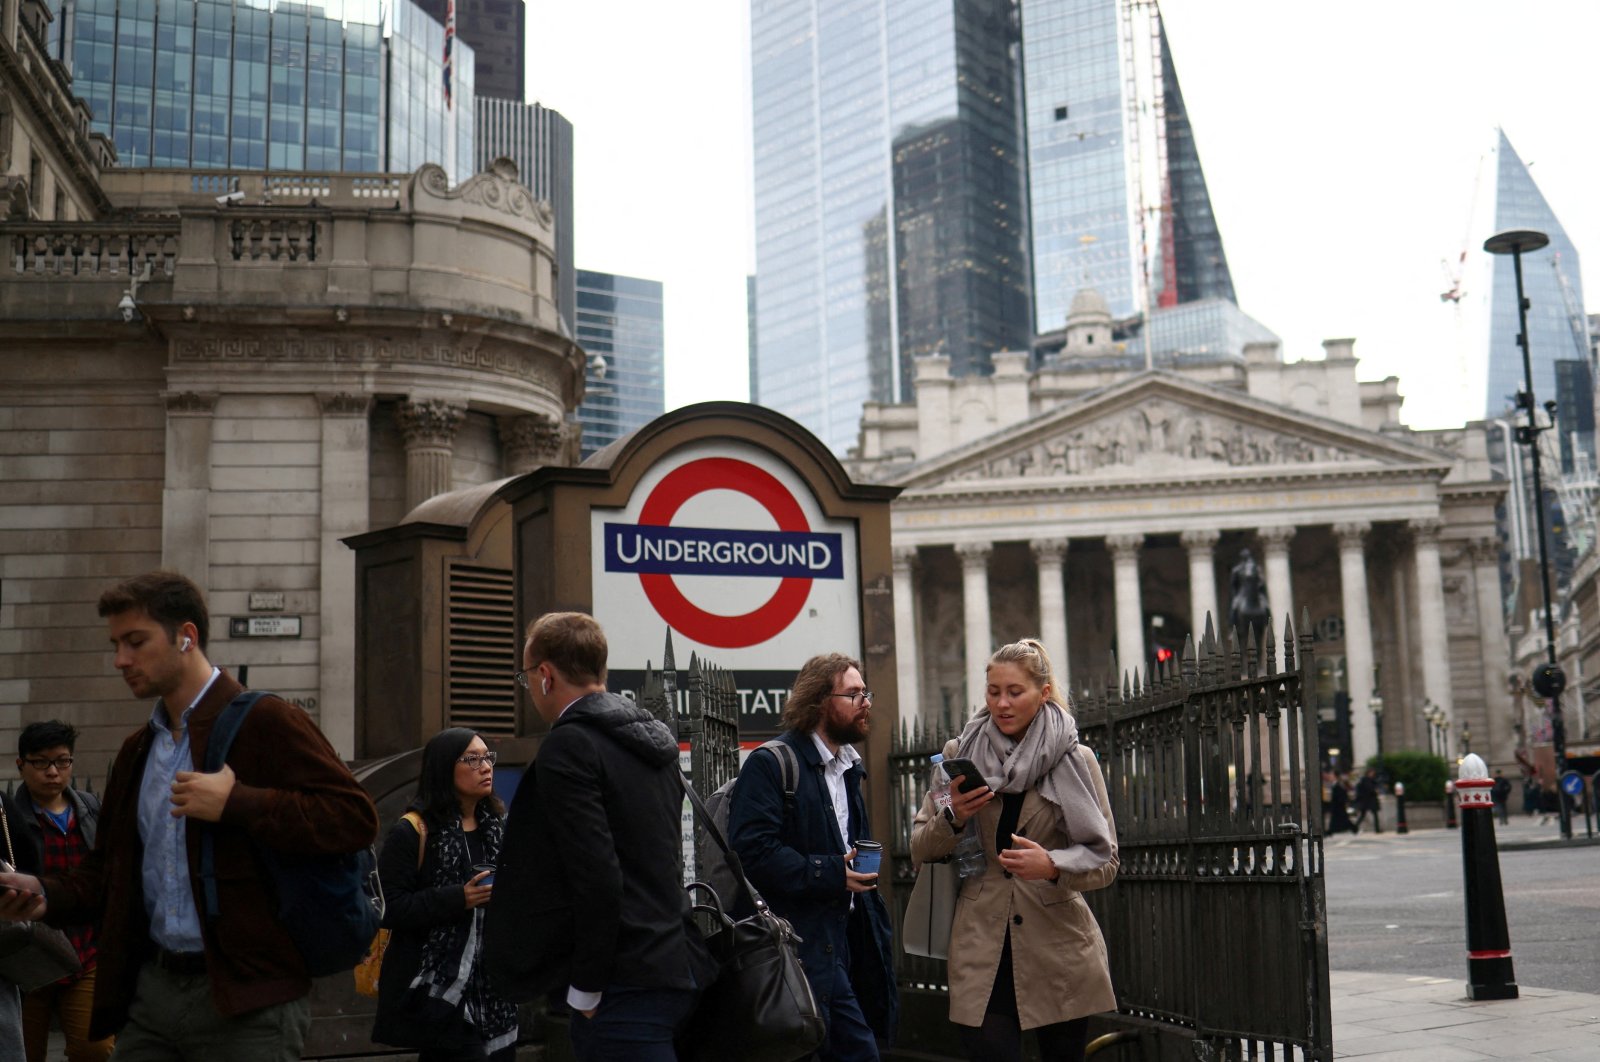 People exit Bank underground station in the City of London financial district during rush hour in London, Britain, Oct. 3, 2022. (Reuters Photo)